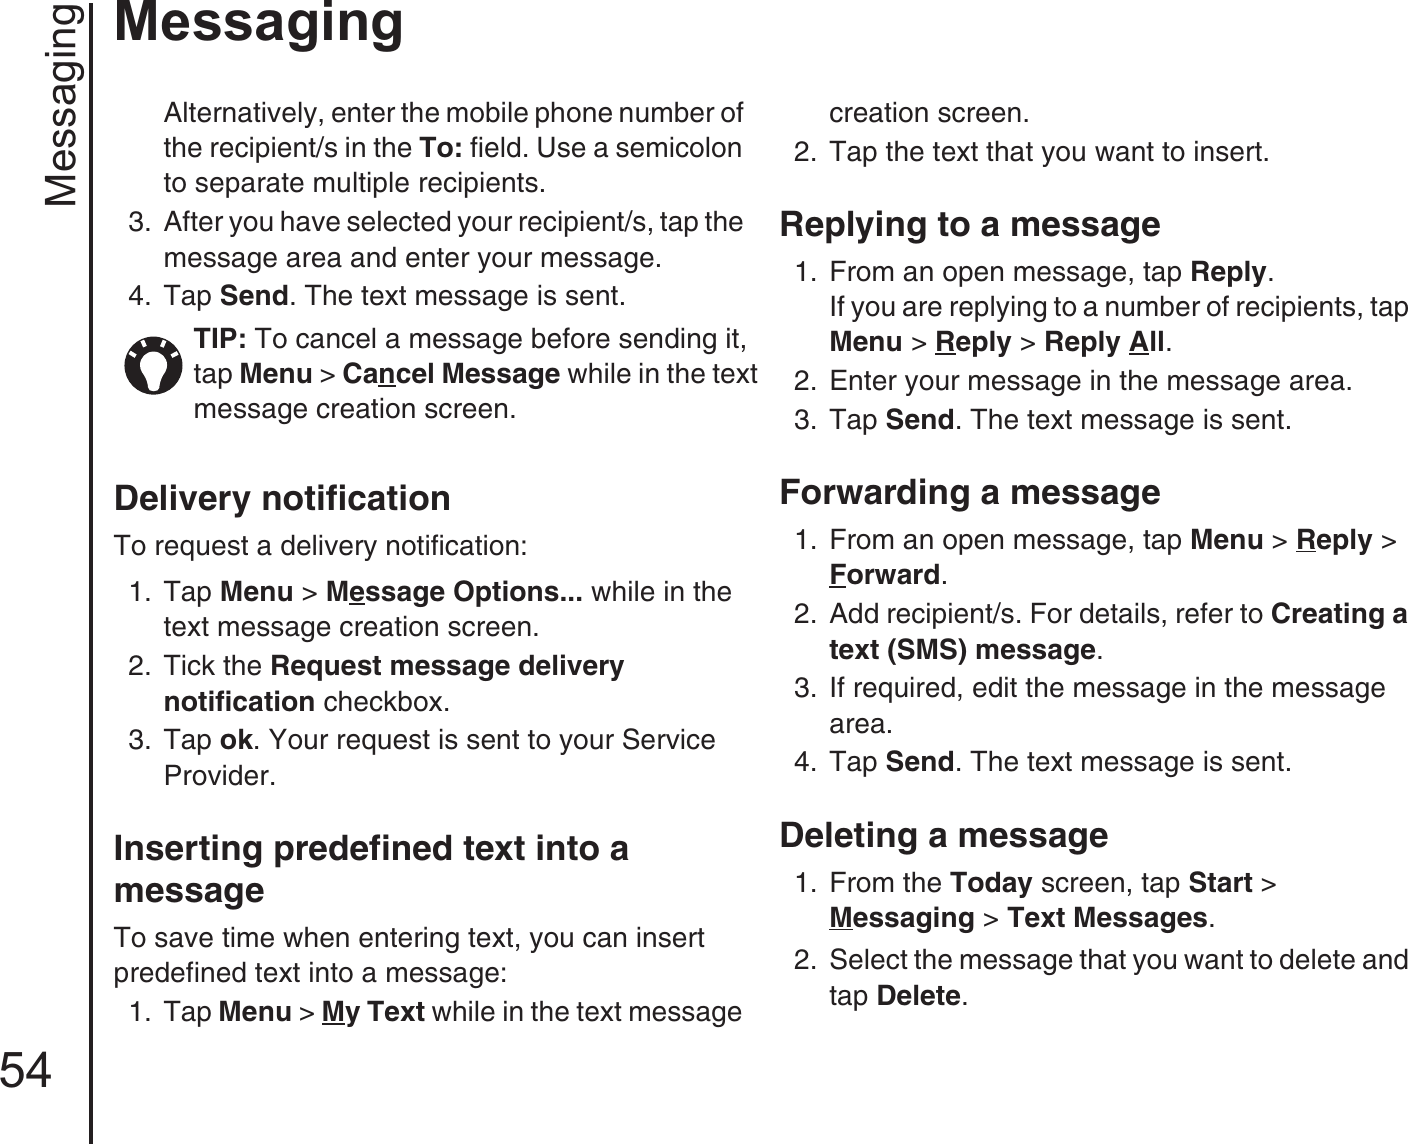 Messaging54MessagingAlternatively, enter the mobile phone number of the recipient/s in the To: field. Use a semicolon to separate multiple recipients. 3.  After you have selected your recipient/s, tap the message area and enter your message.4.  Tap Send. The text message is sent. Delivery notificationTo request a delivery notification:1.  Tap Menu &gt; Message Options... while in the text message creation screen. 2.  Tick the Request message delivery notification checkbox. 3.  Tap ok. Your request is sent to your Service Provider.Inserting predefined text into a messageTo save time when entering text, you can insert predefined text into a message:1.  Tap Menu &gt; My Text while in the text message creation screen. 2.  Tap the text that you want to insert.Replying to a message 1.  From an open message, tap Reply.If you are replying to a number of recipients, tap Menu &gt; Reply &gt; Reply All.2.  Enter your message in the message area. 3.  Tap Send. The text message is sent.Forwarding a message1.  From an open message, tap Menu &gt; Reply &gt; Forward.2.  Add recipient/s. For details, refer to Creating a text (SMS) message.3.  If required, edit the message in the message area. 4.  Tap Send. The text message is sent.Deleting a message1.  From the Today screen, tap Start &gt; Messaging &gt; Text Messages.2.  Select the message that you want to delete and tap Delete. TIP: To cancel a message before sending it, tap Menu &gt; Cancel Message while in the text message creation screen.